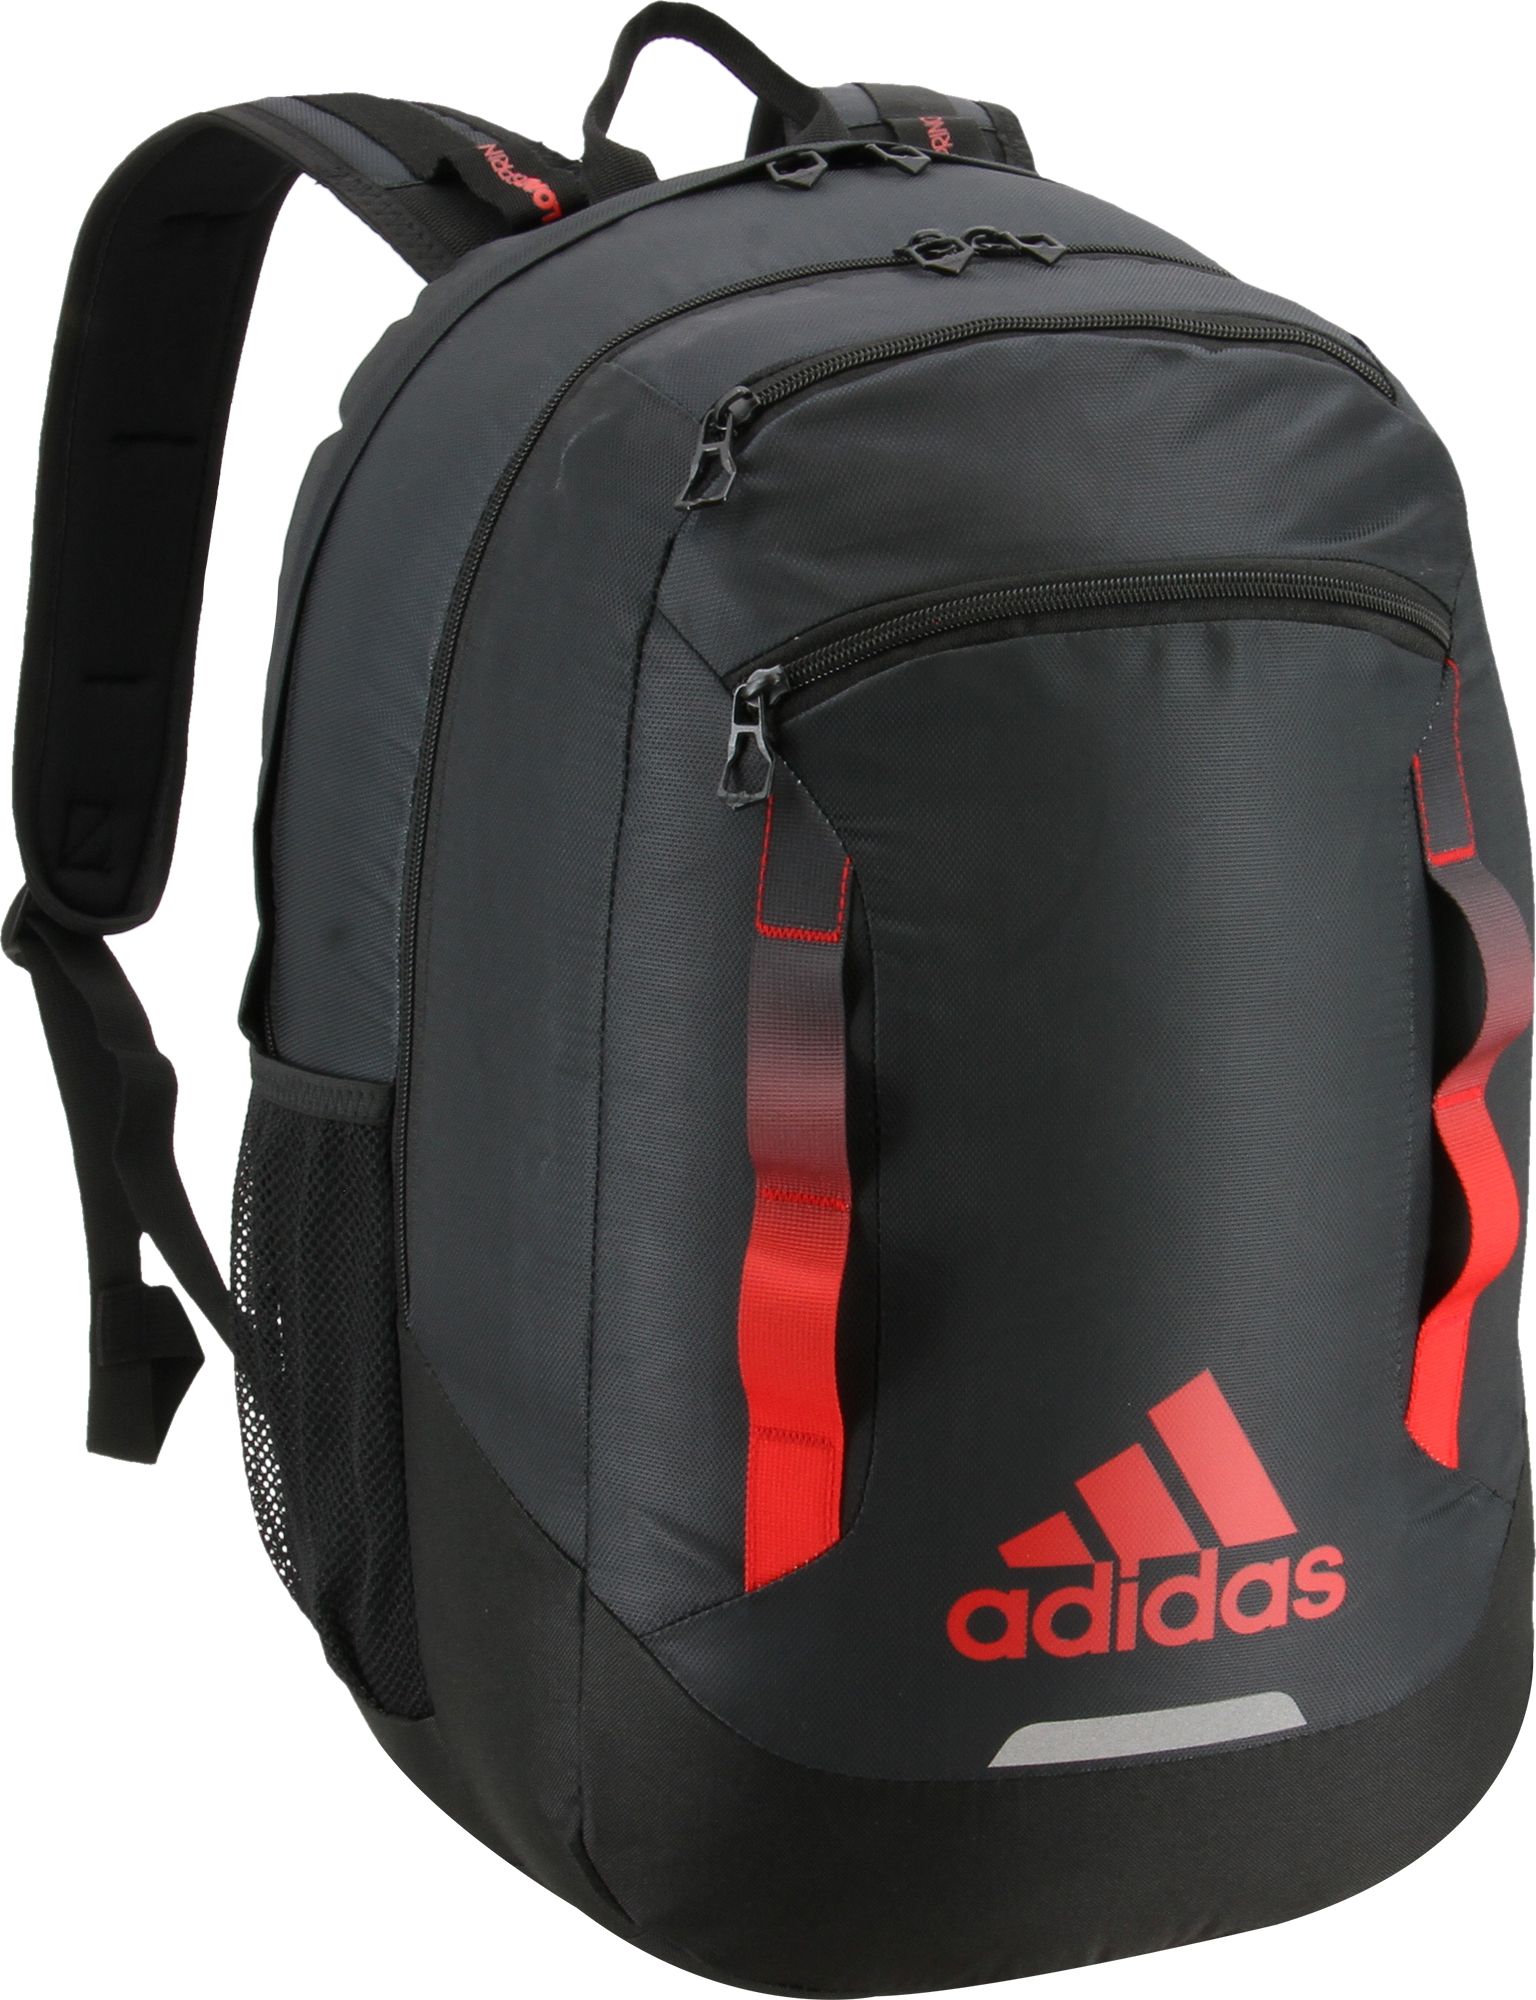 adidas backpack with laptop compartment